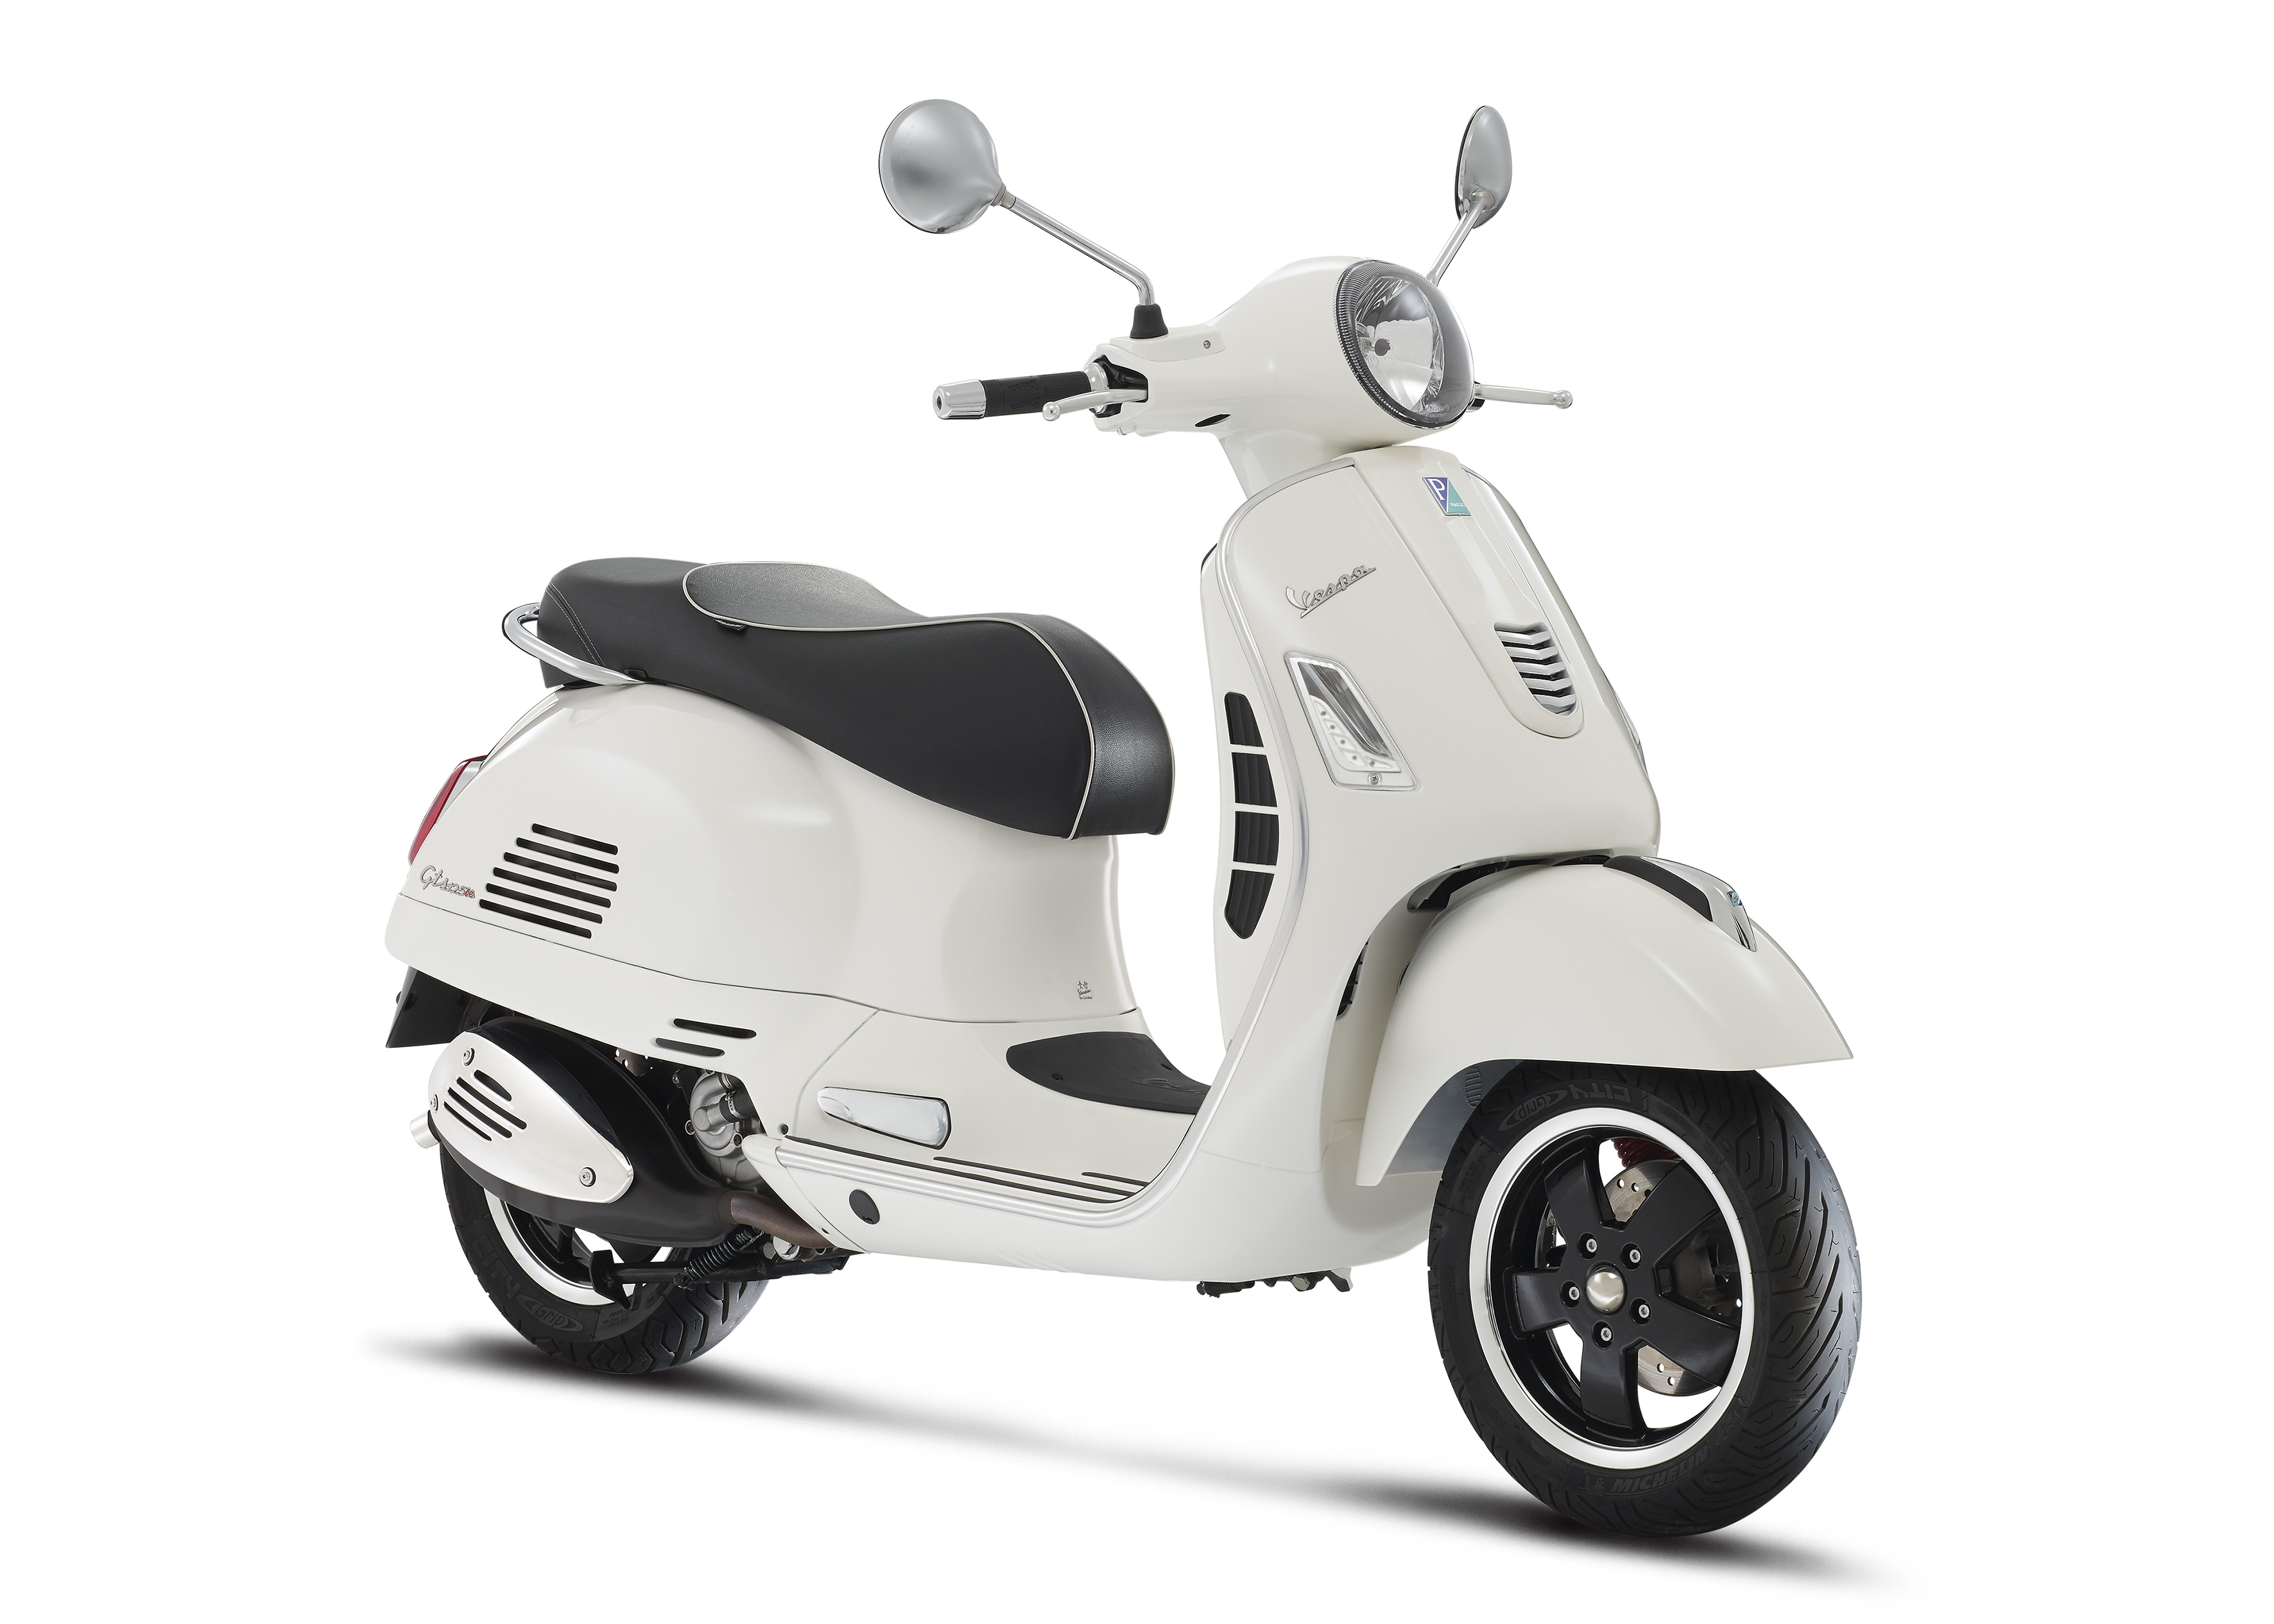 First ride: Vespa GTS 300 Super review